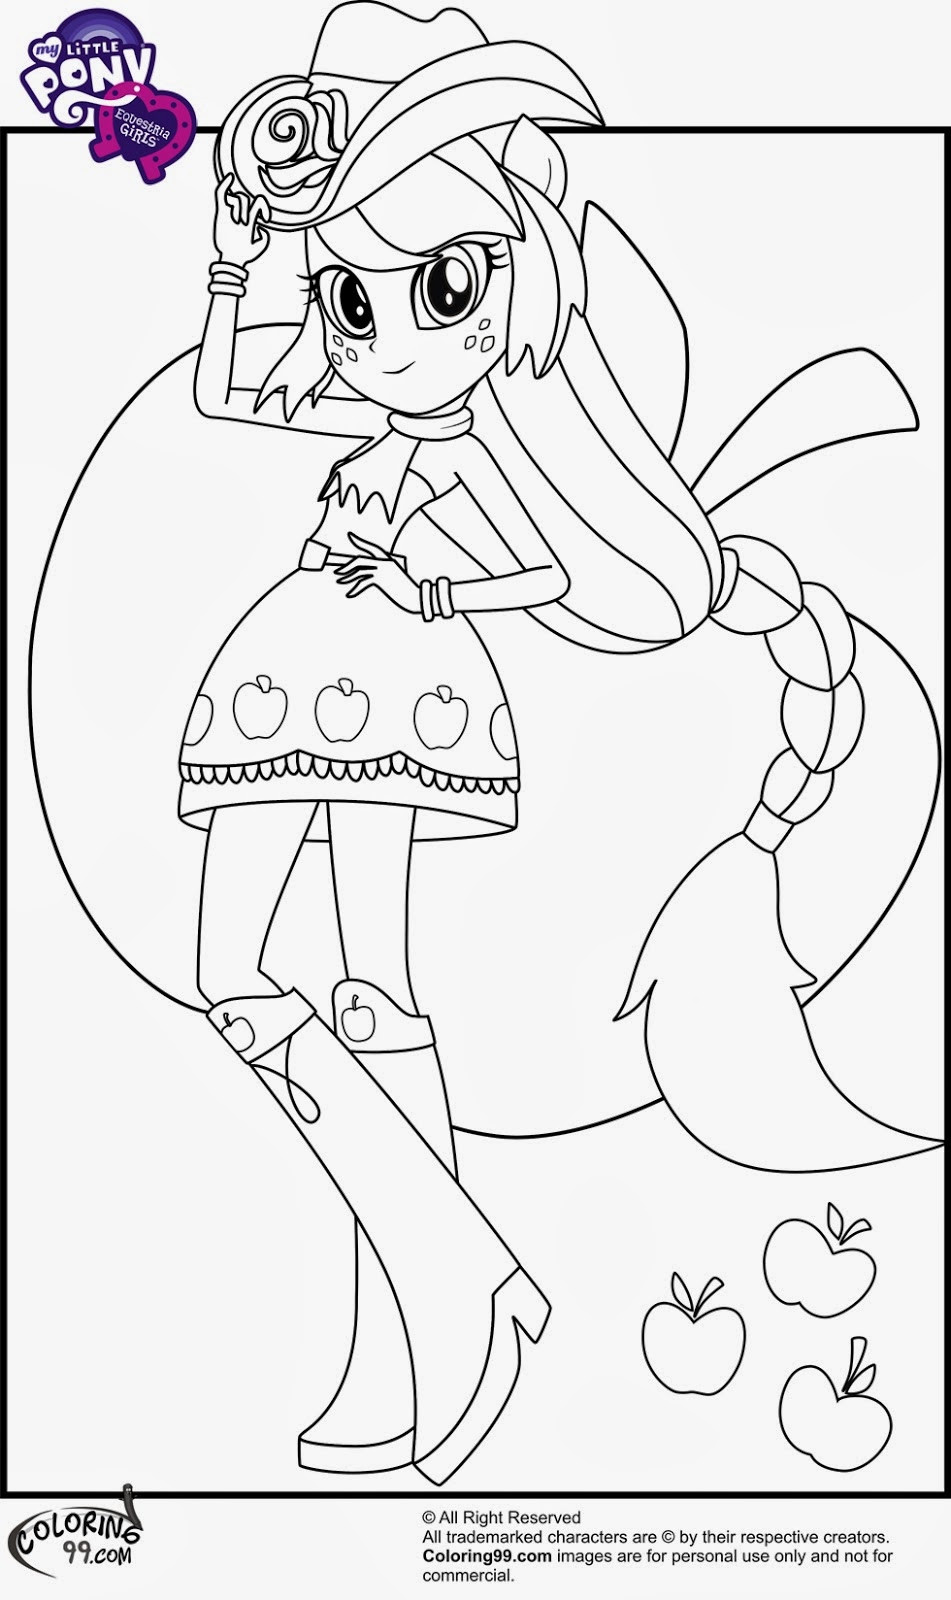 My Little Pony Girls Coloring Pages
 My Little Pony Equestria Girls Blog ¡¡Imágenes para